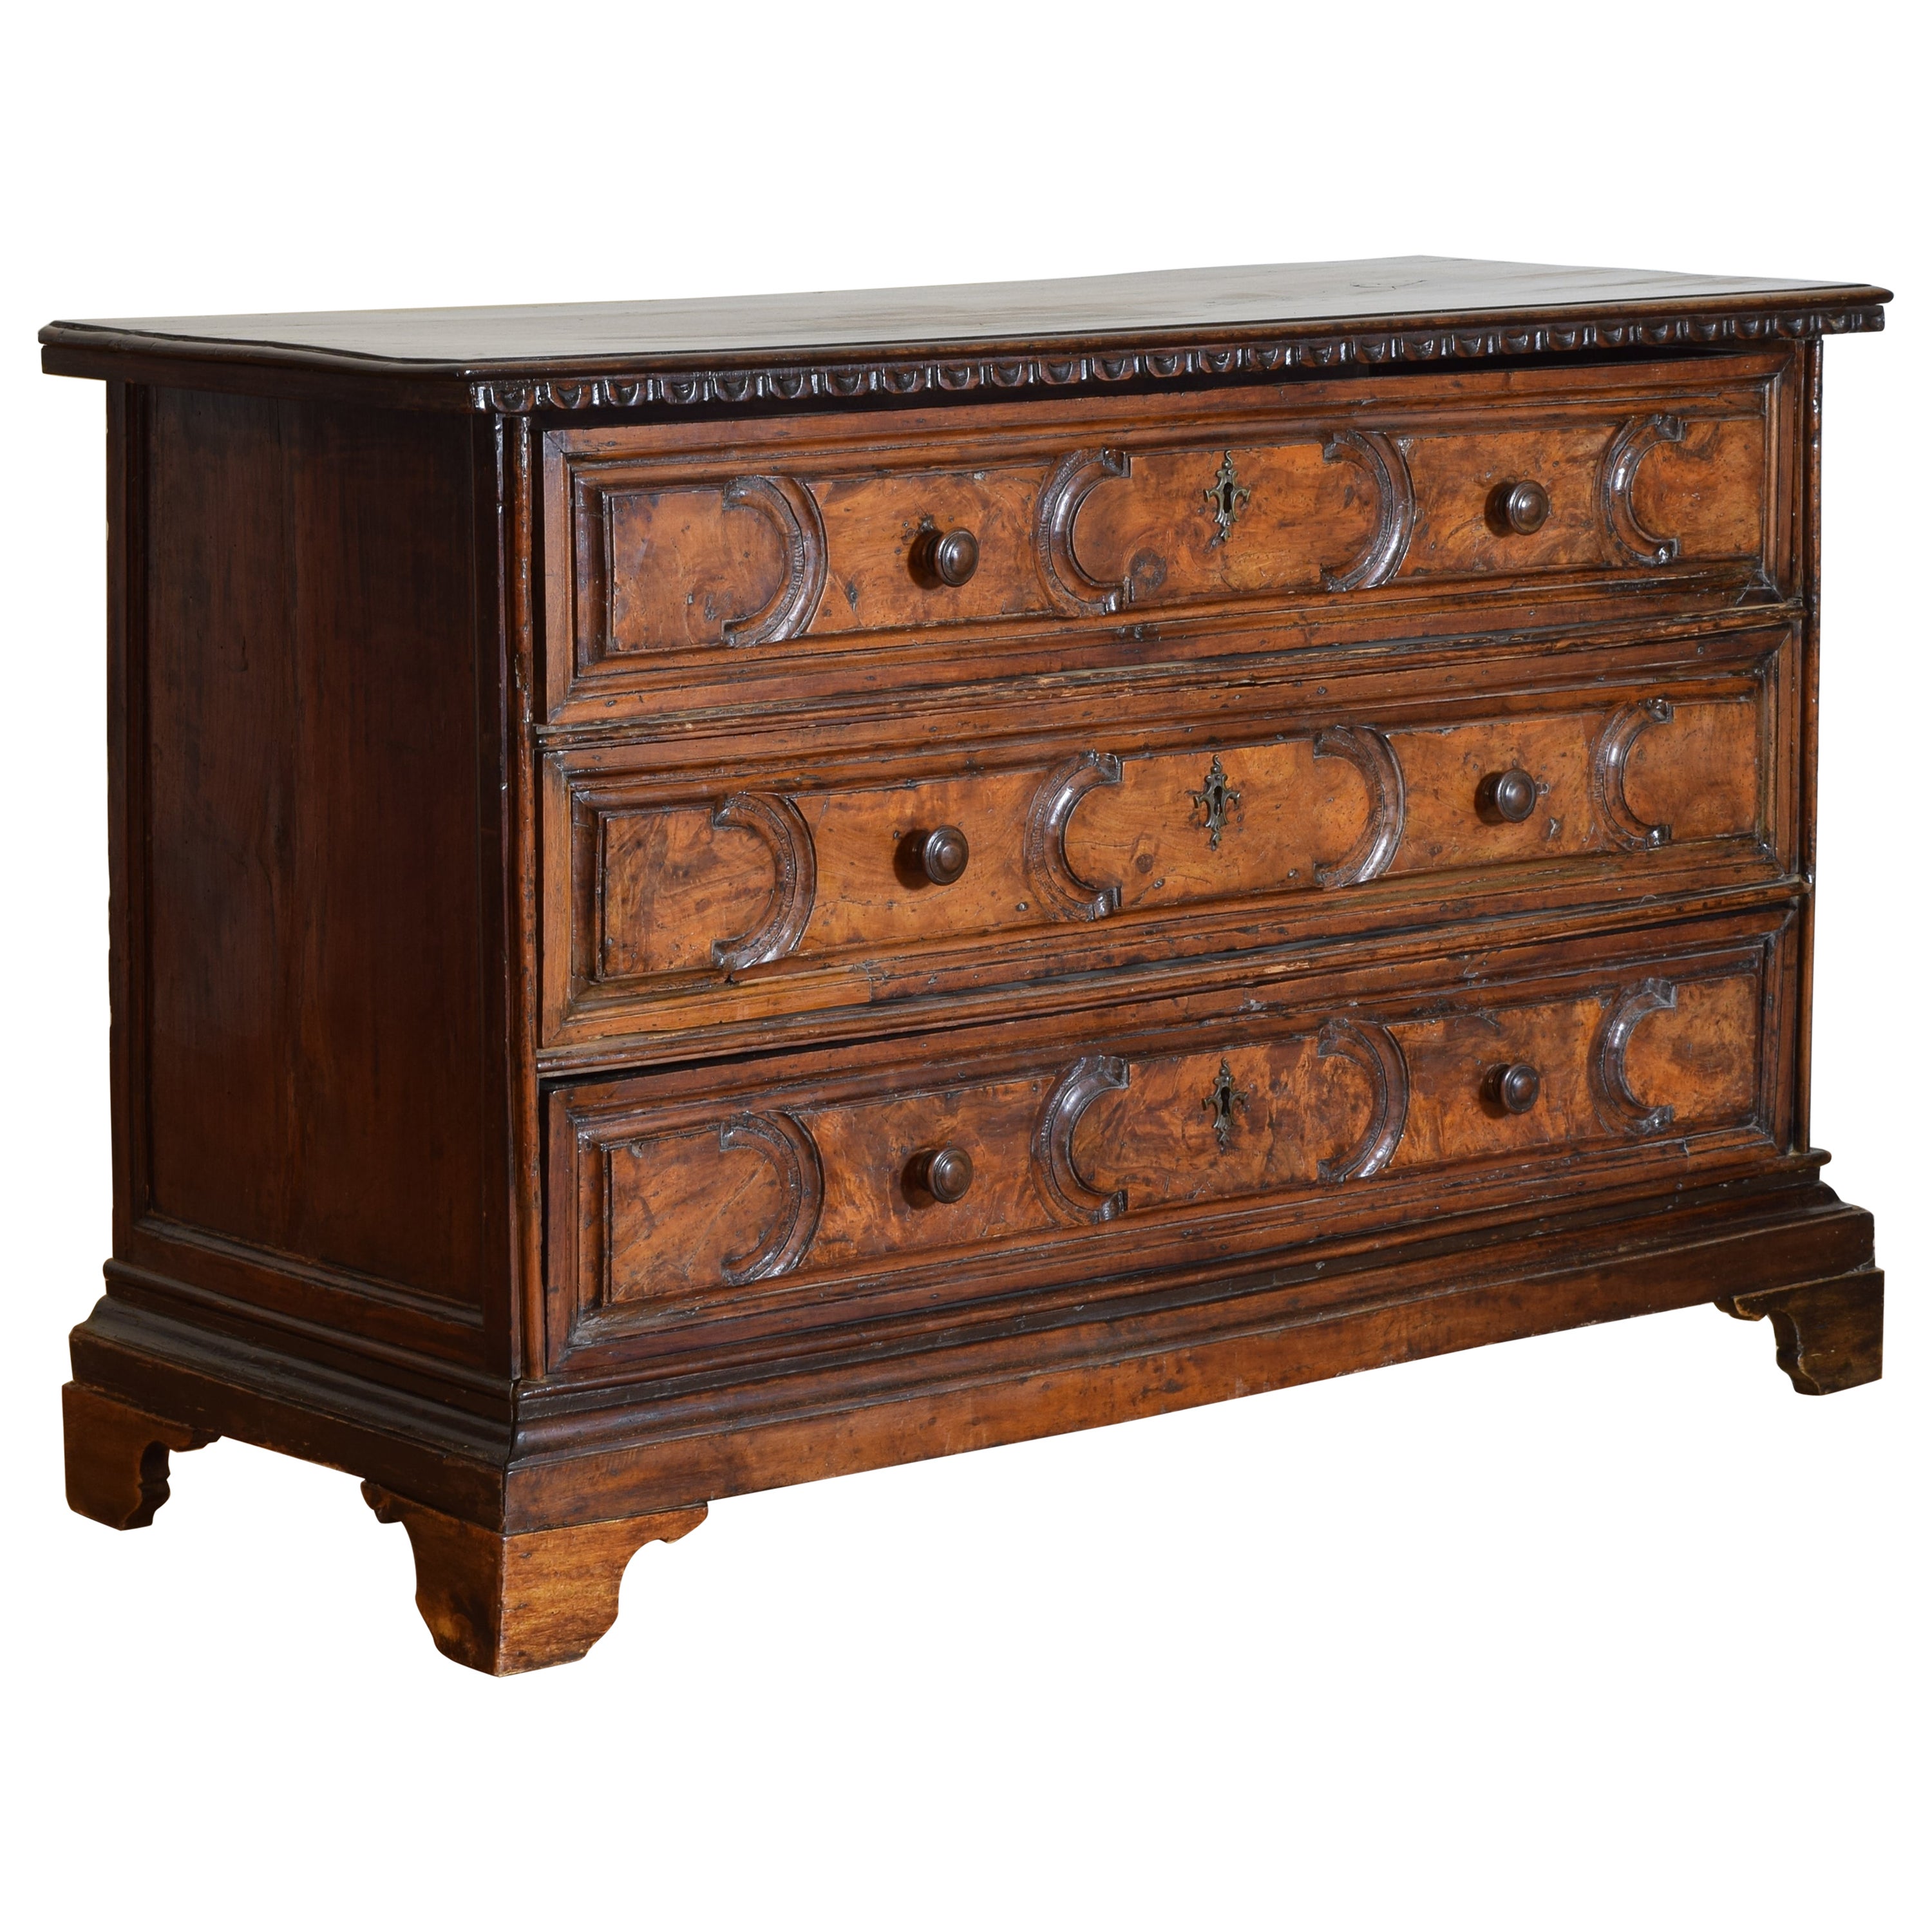 Italian, Lombardia Carved Walnut 3- Drawer Commode, Early 18th C For Sale